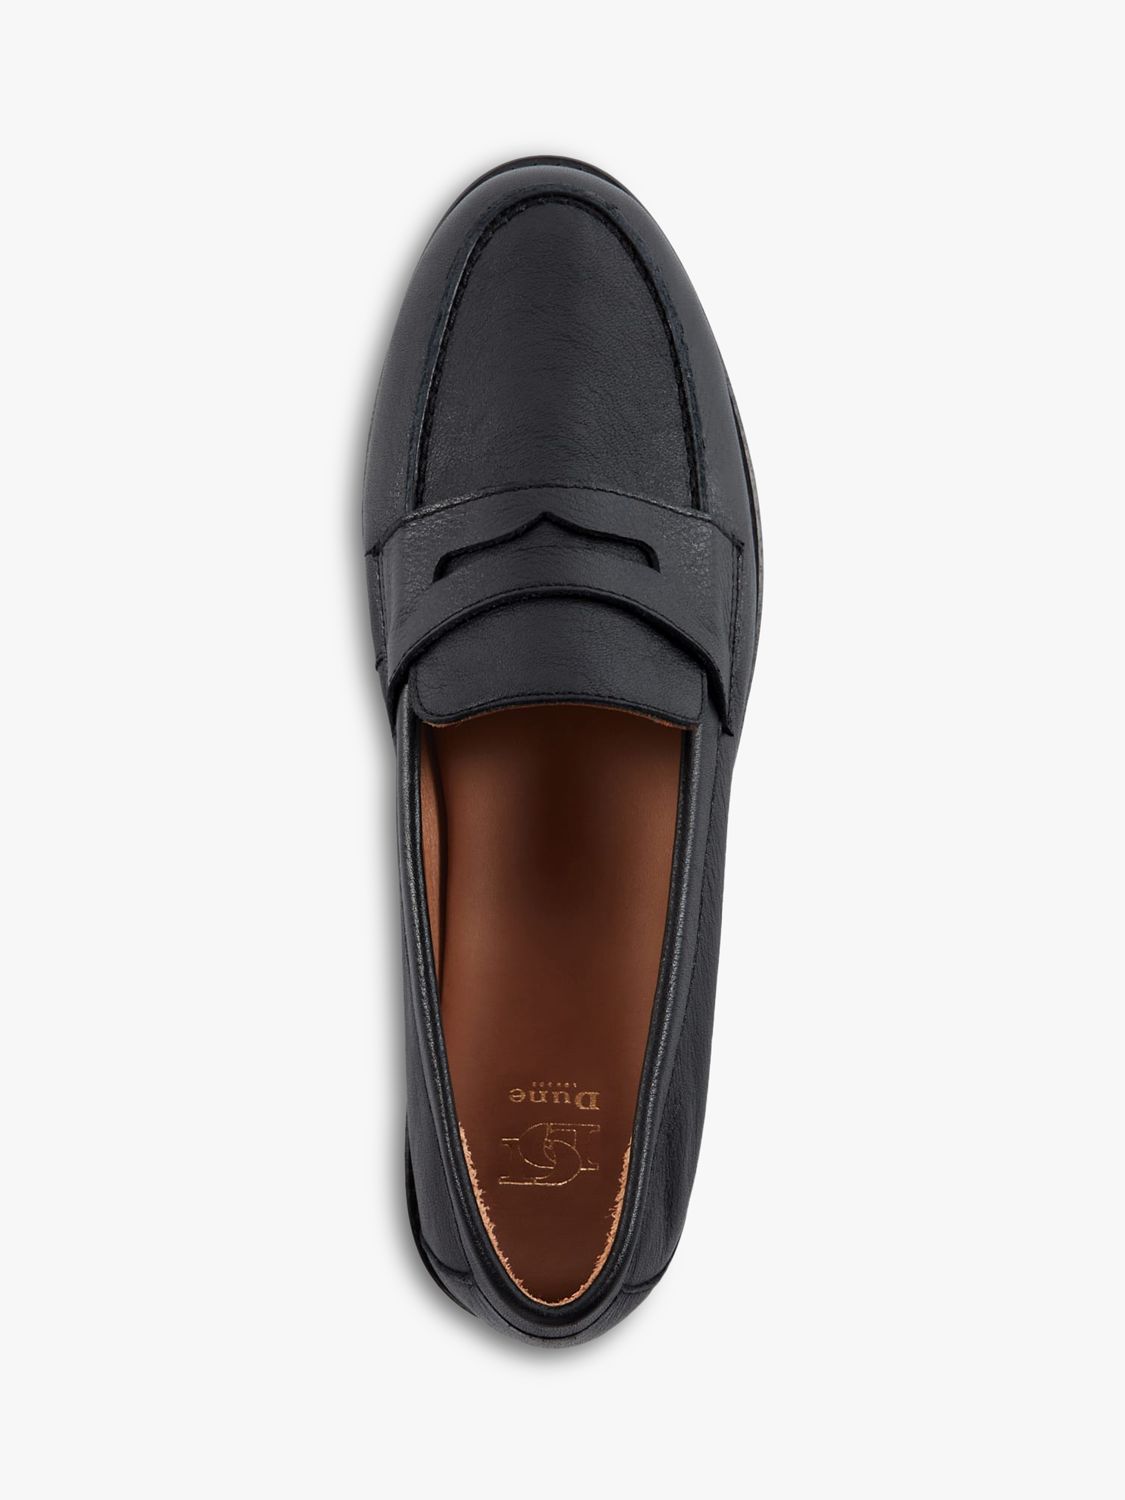 Dune Ginelli Leather Penny Loafers, Black at John Lewis & Partners